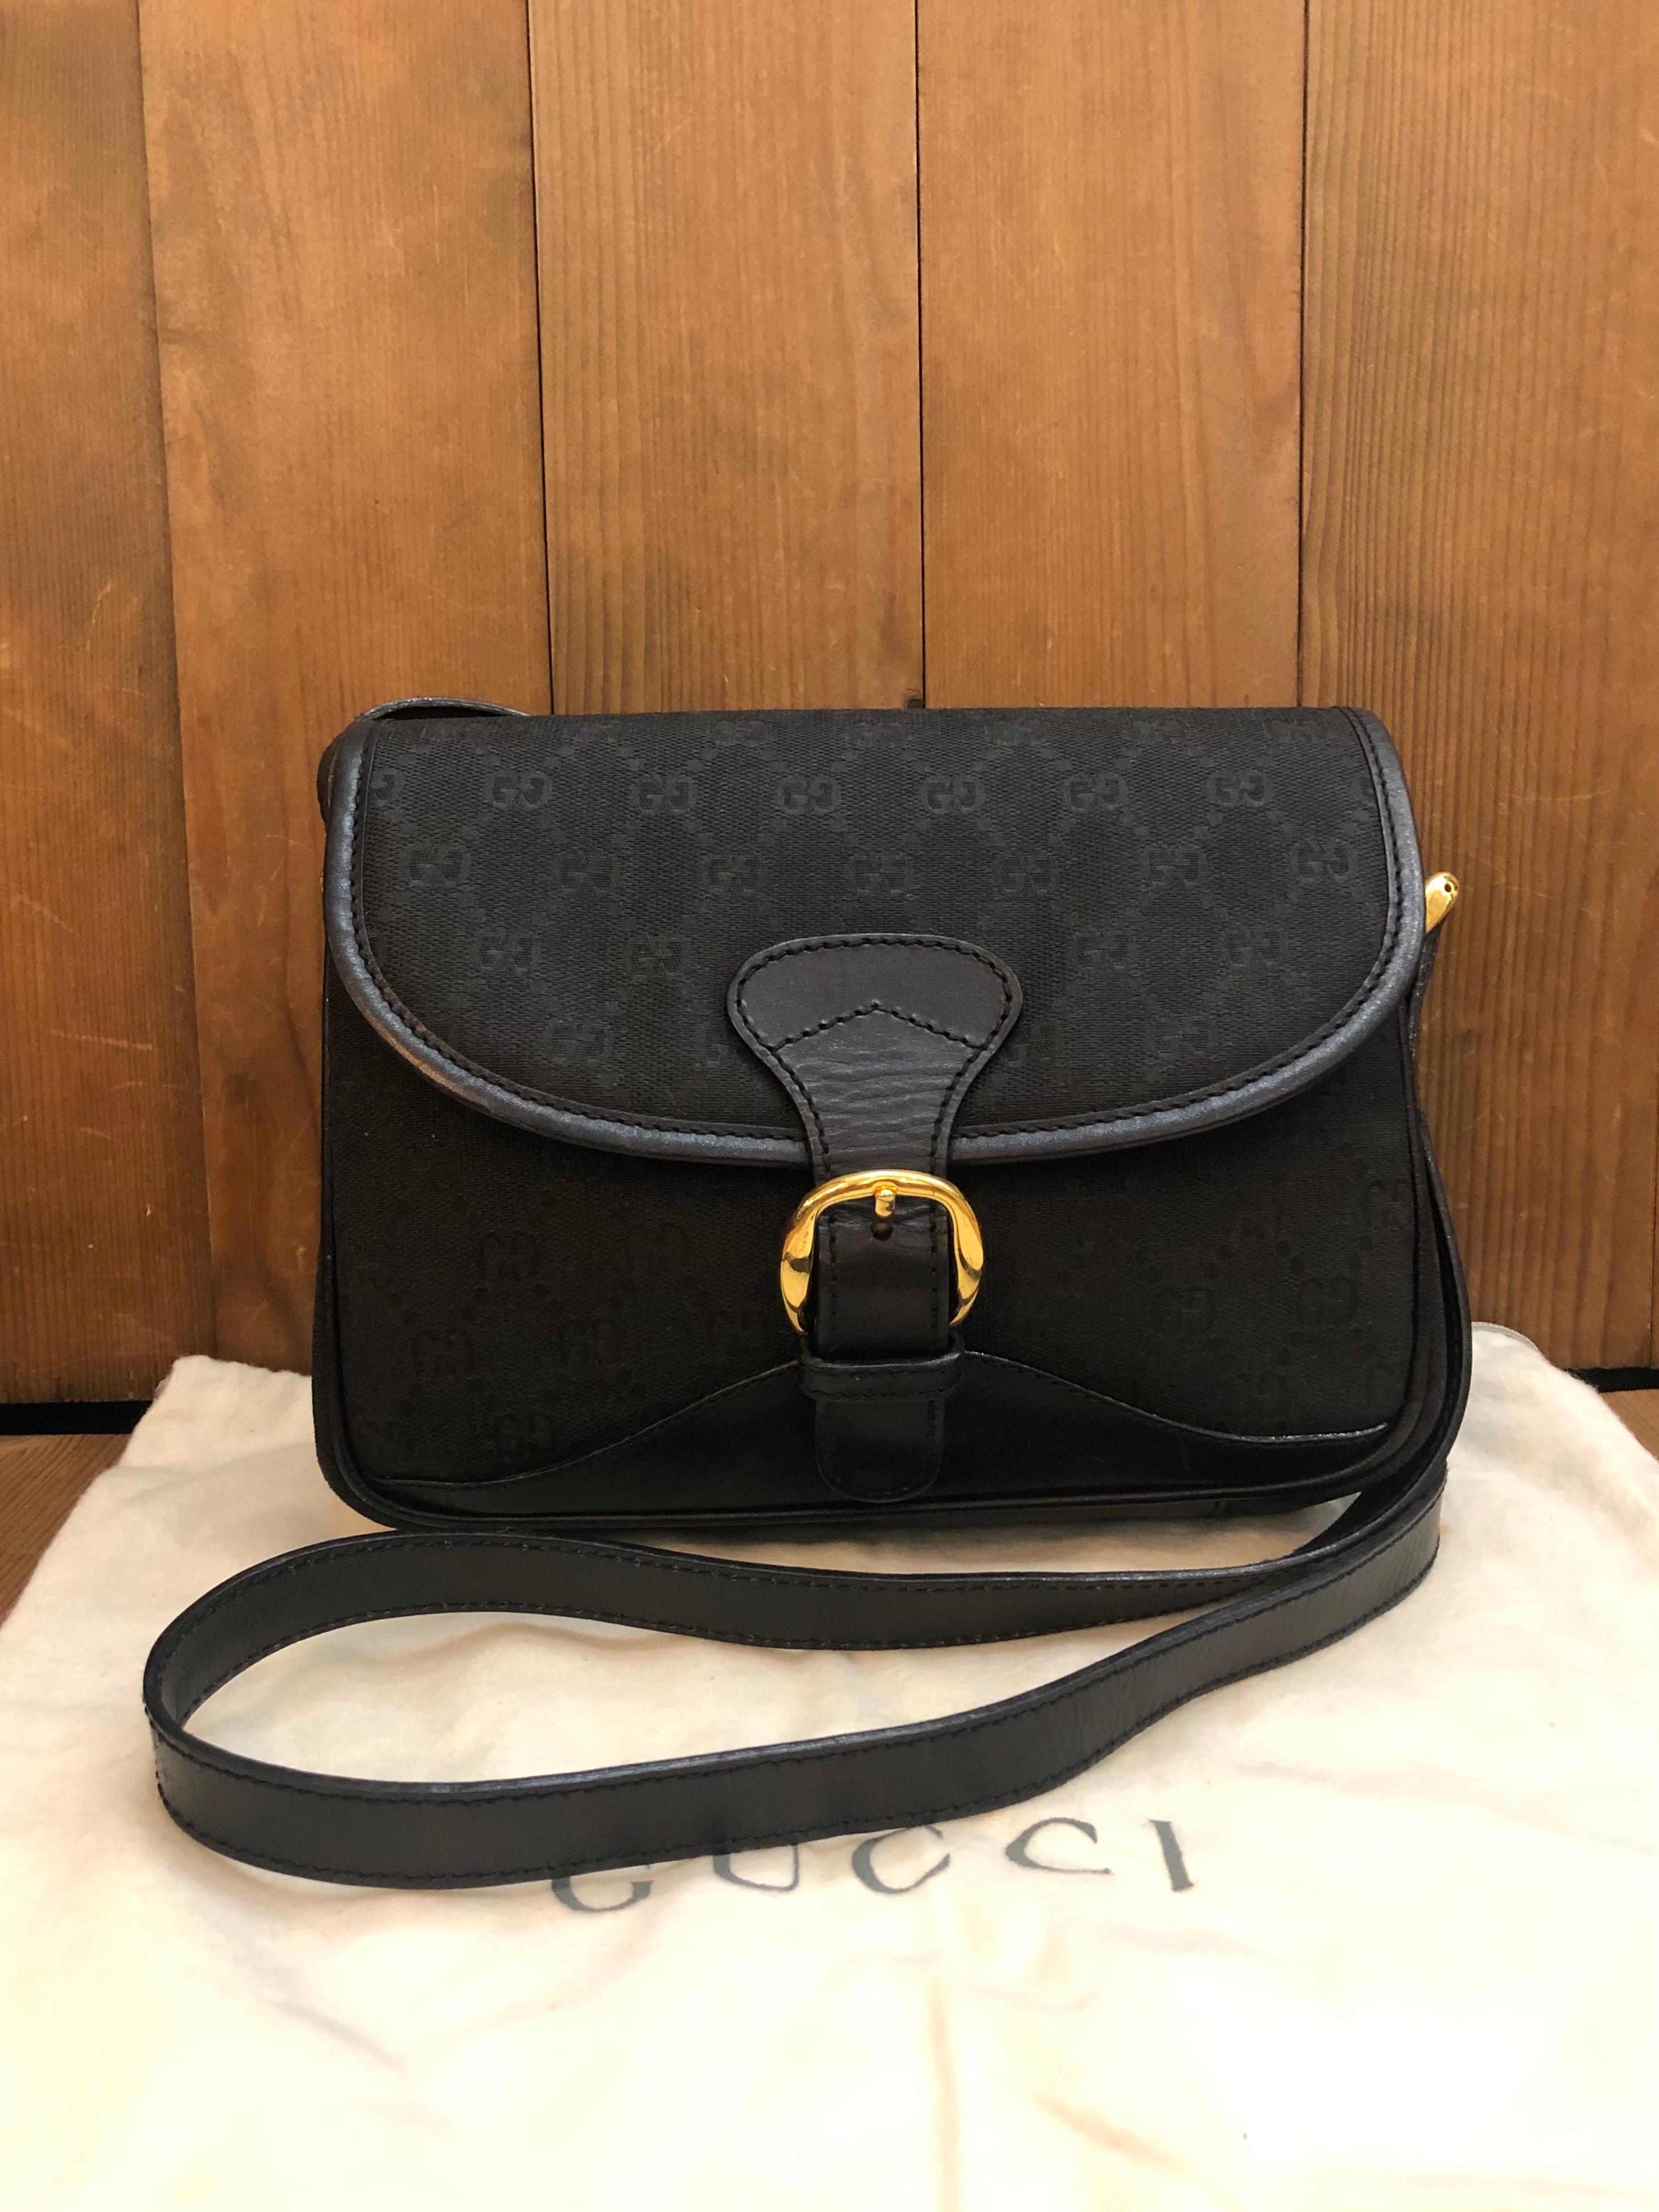 This Vintage GUCCI messenger bag is crafted of GG jacquard in black trimmed with black smooth leather. Front flap faux-buckle magnetic snap closure opens to a new interior in black featuring three main compartments and a zippered pocket. Made in